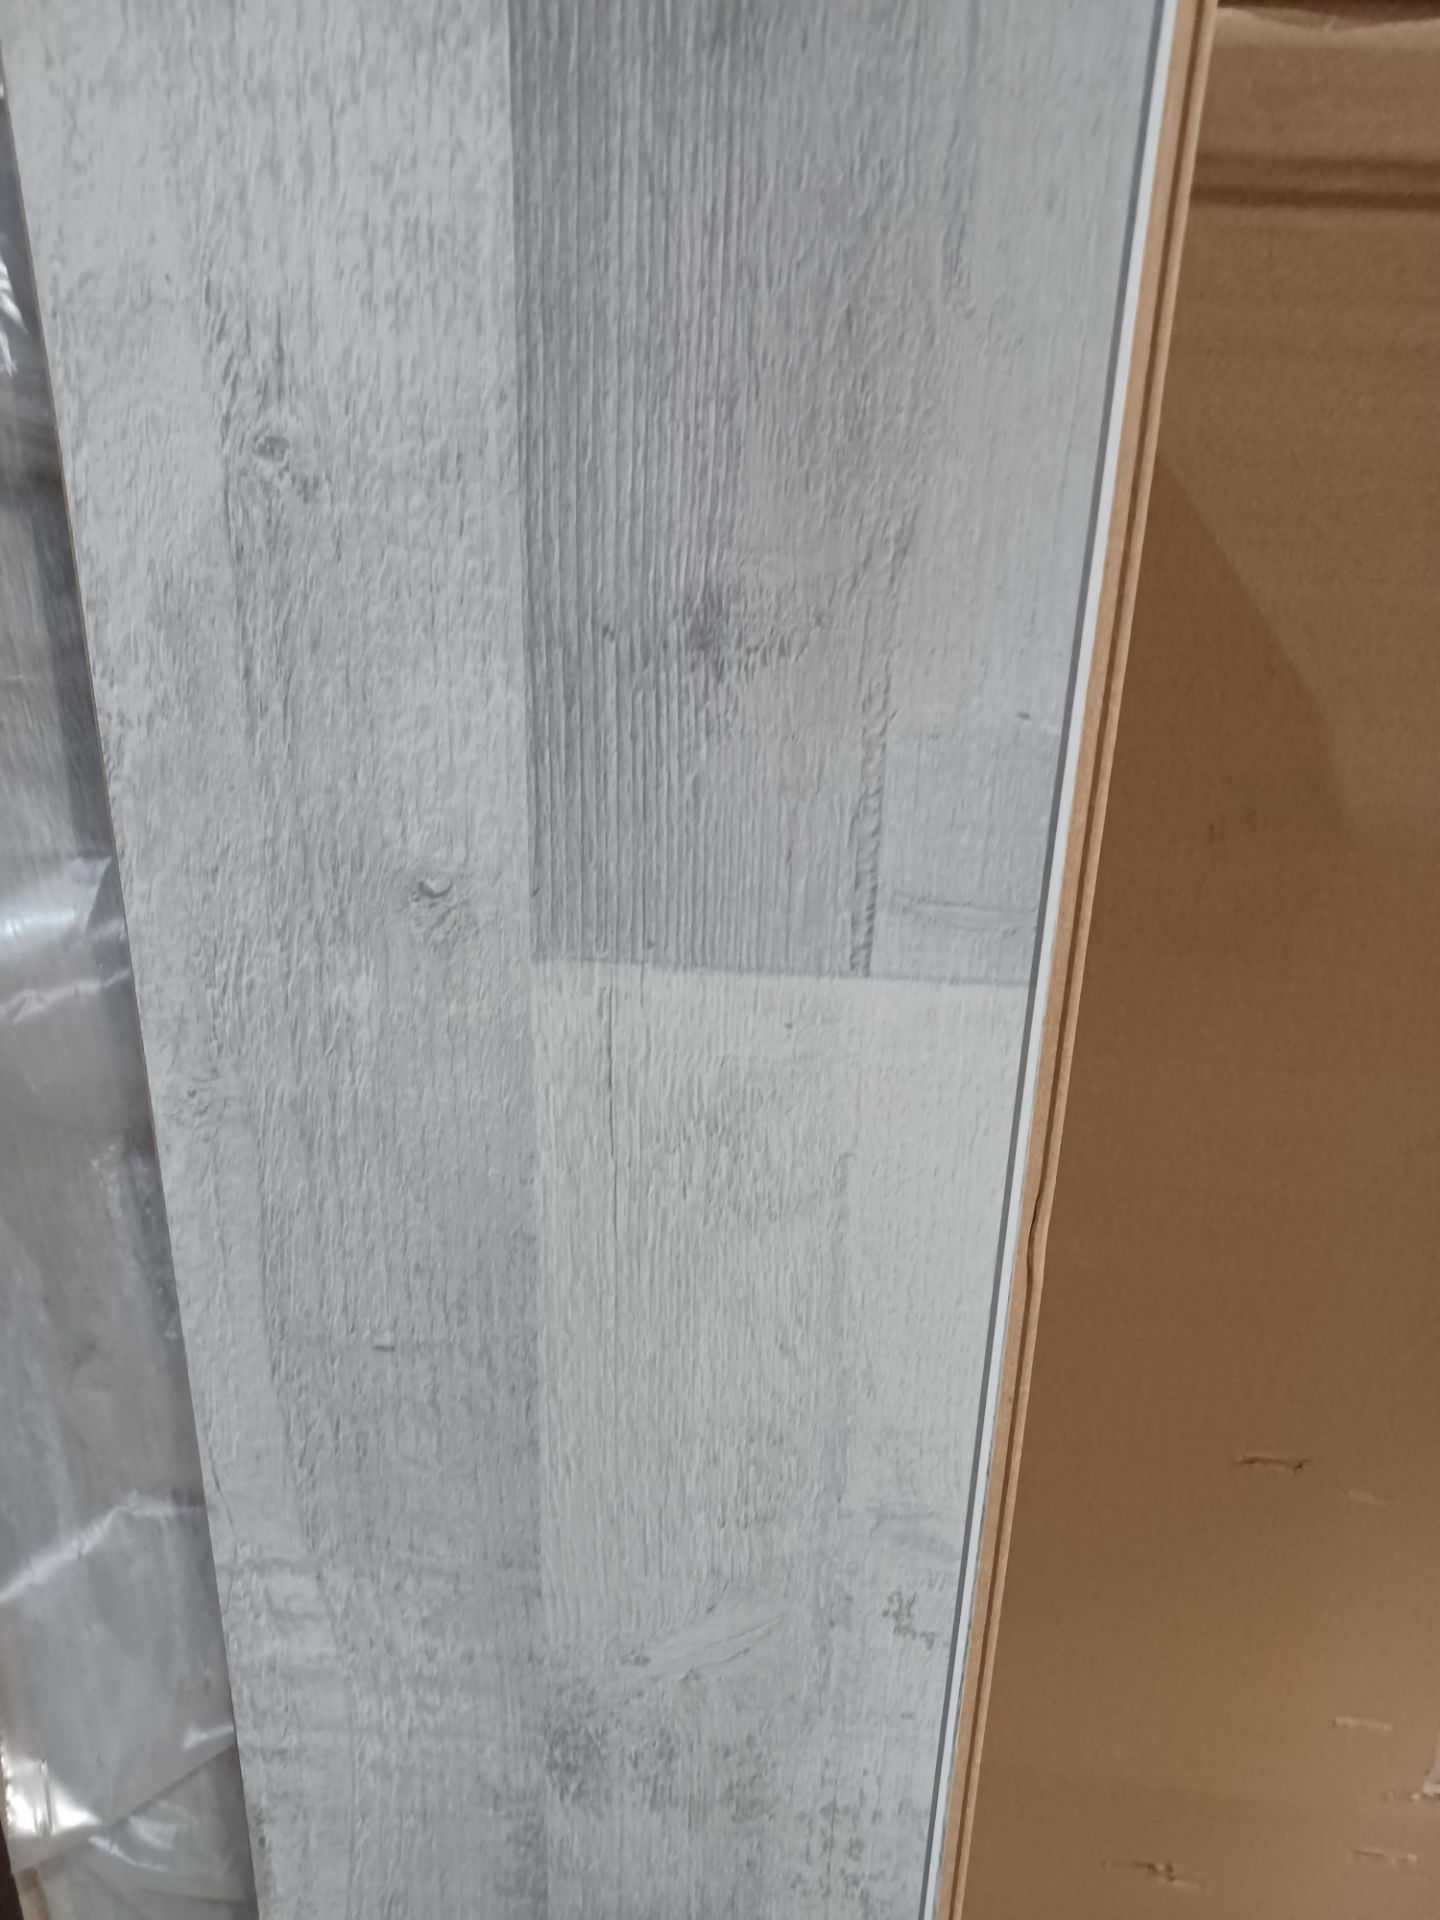 10 X PACKS OF Rockhampton Grey Oak effect Laminate Flooring. Each pack contains 2.47m2, giving - Image 2 of 2